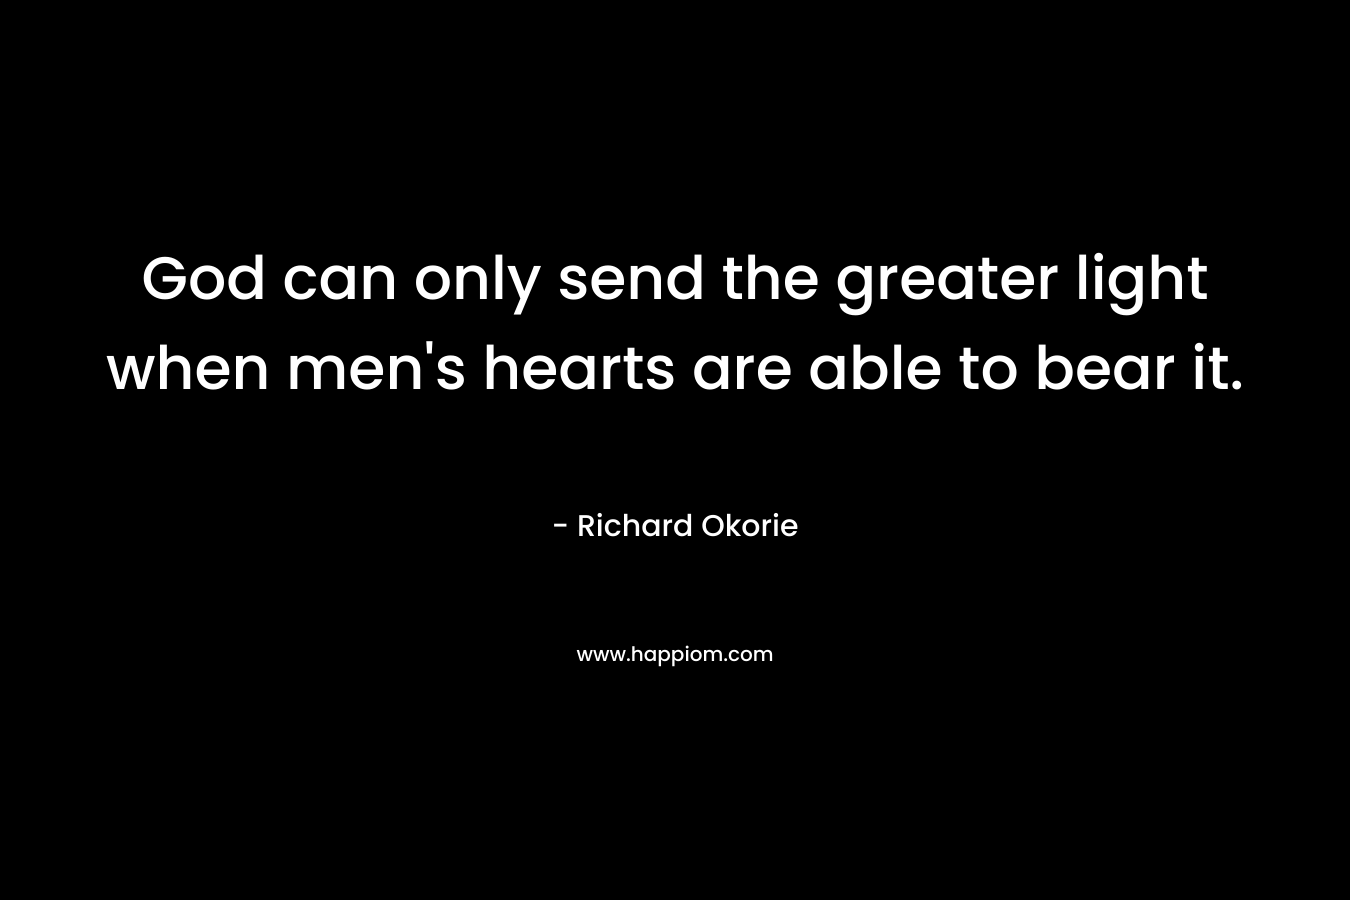 God can only send the greater light when men’s hearts are able to bear it. – Richard Okorie